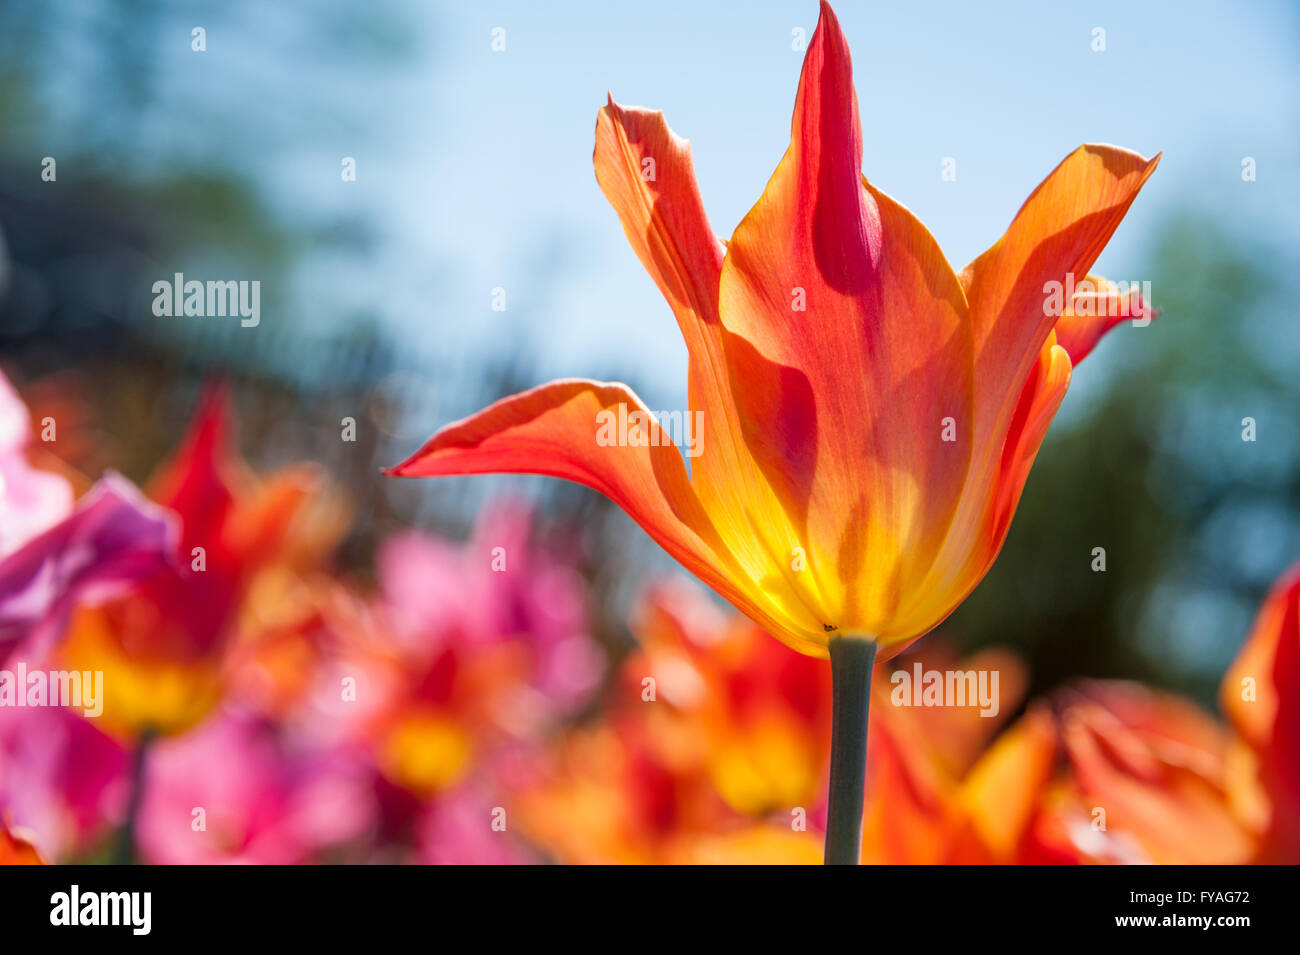 Fiery red, orange and yellow tulip backlit by the sun on a beautiful spring day in a tulip garden. Stock Photo